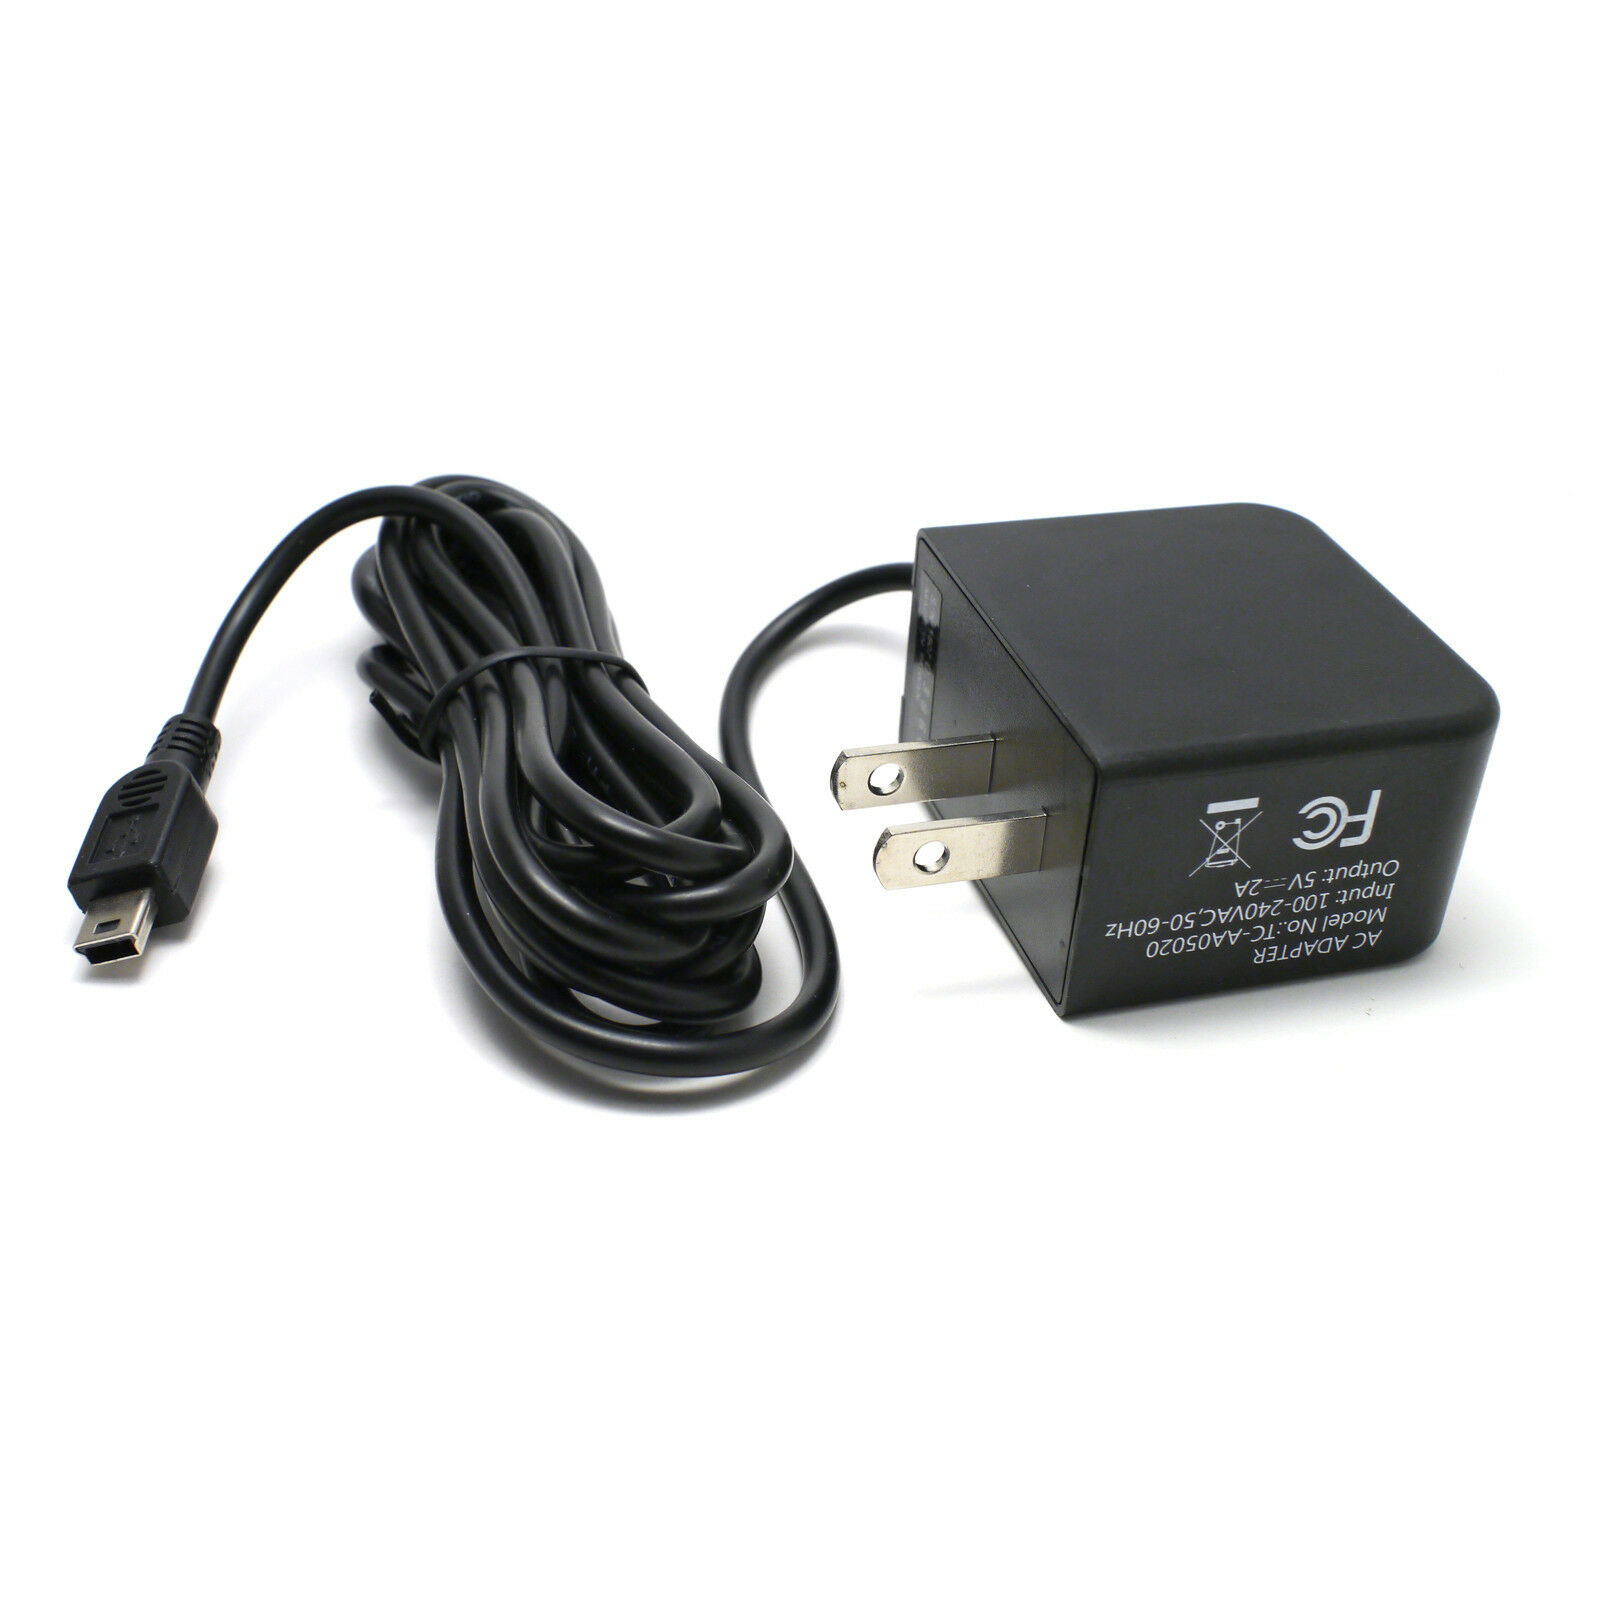 Wall charger power cord for Garmin Drive DriveSmart 50 lmthd Dezl 570lmt 580 GPS Country/Region of Manufacture: Taiwan